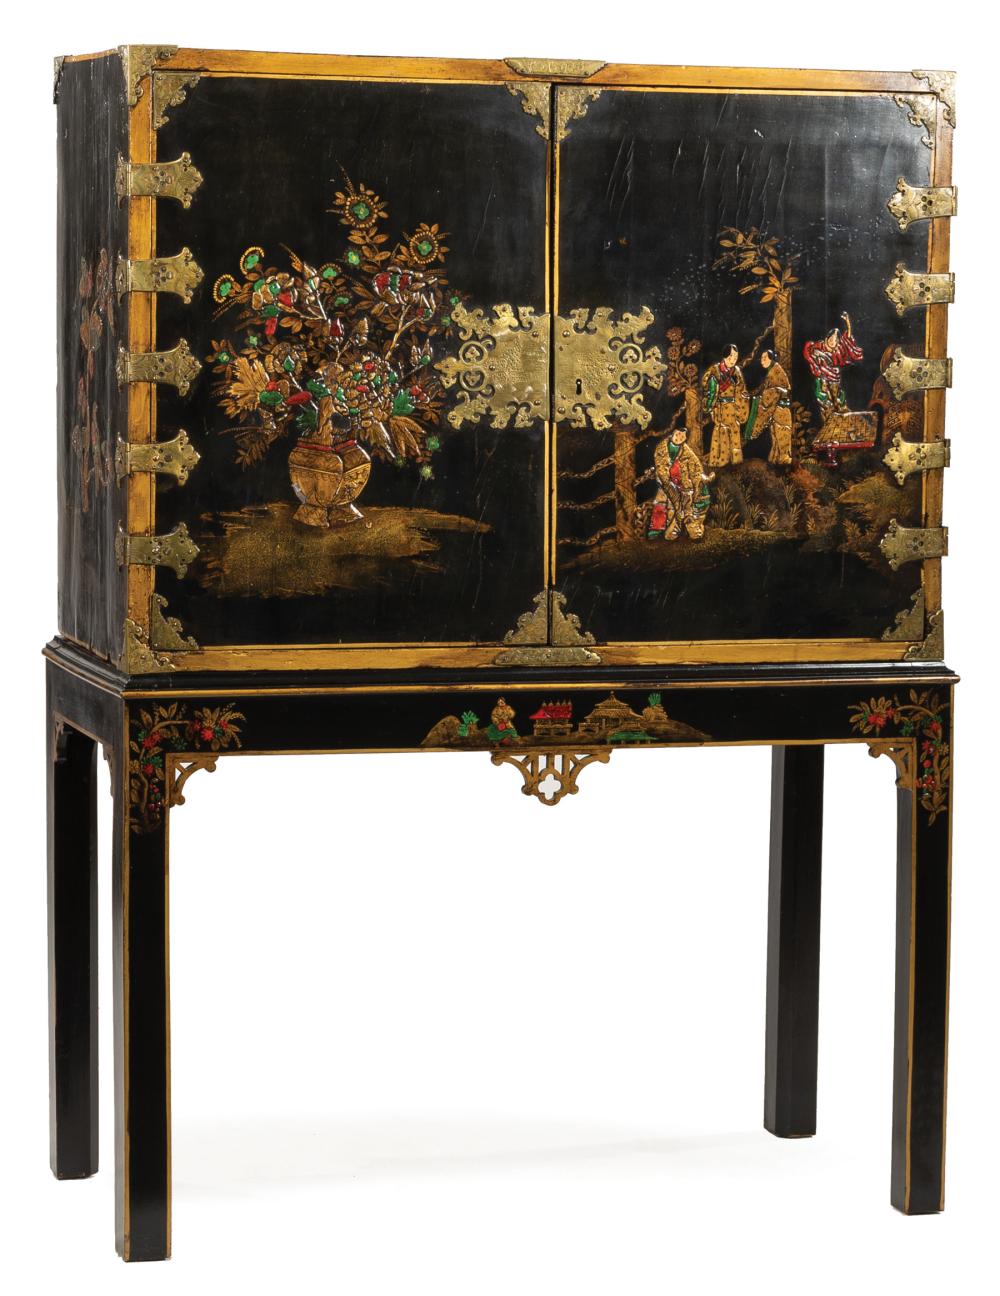 CHINOISERIE LACQUERED CABINET ON 319d4f